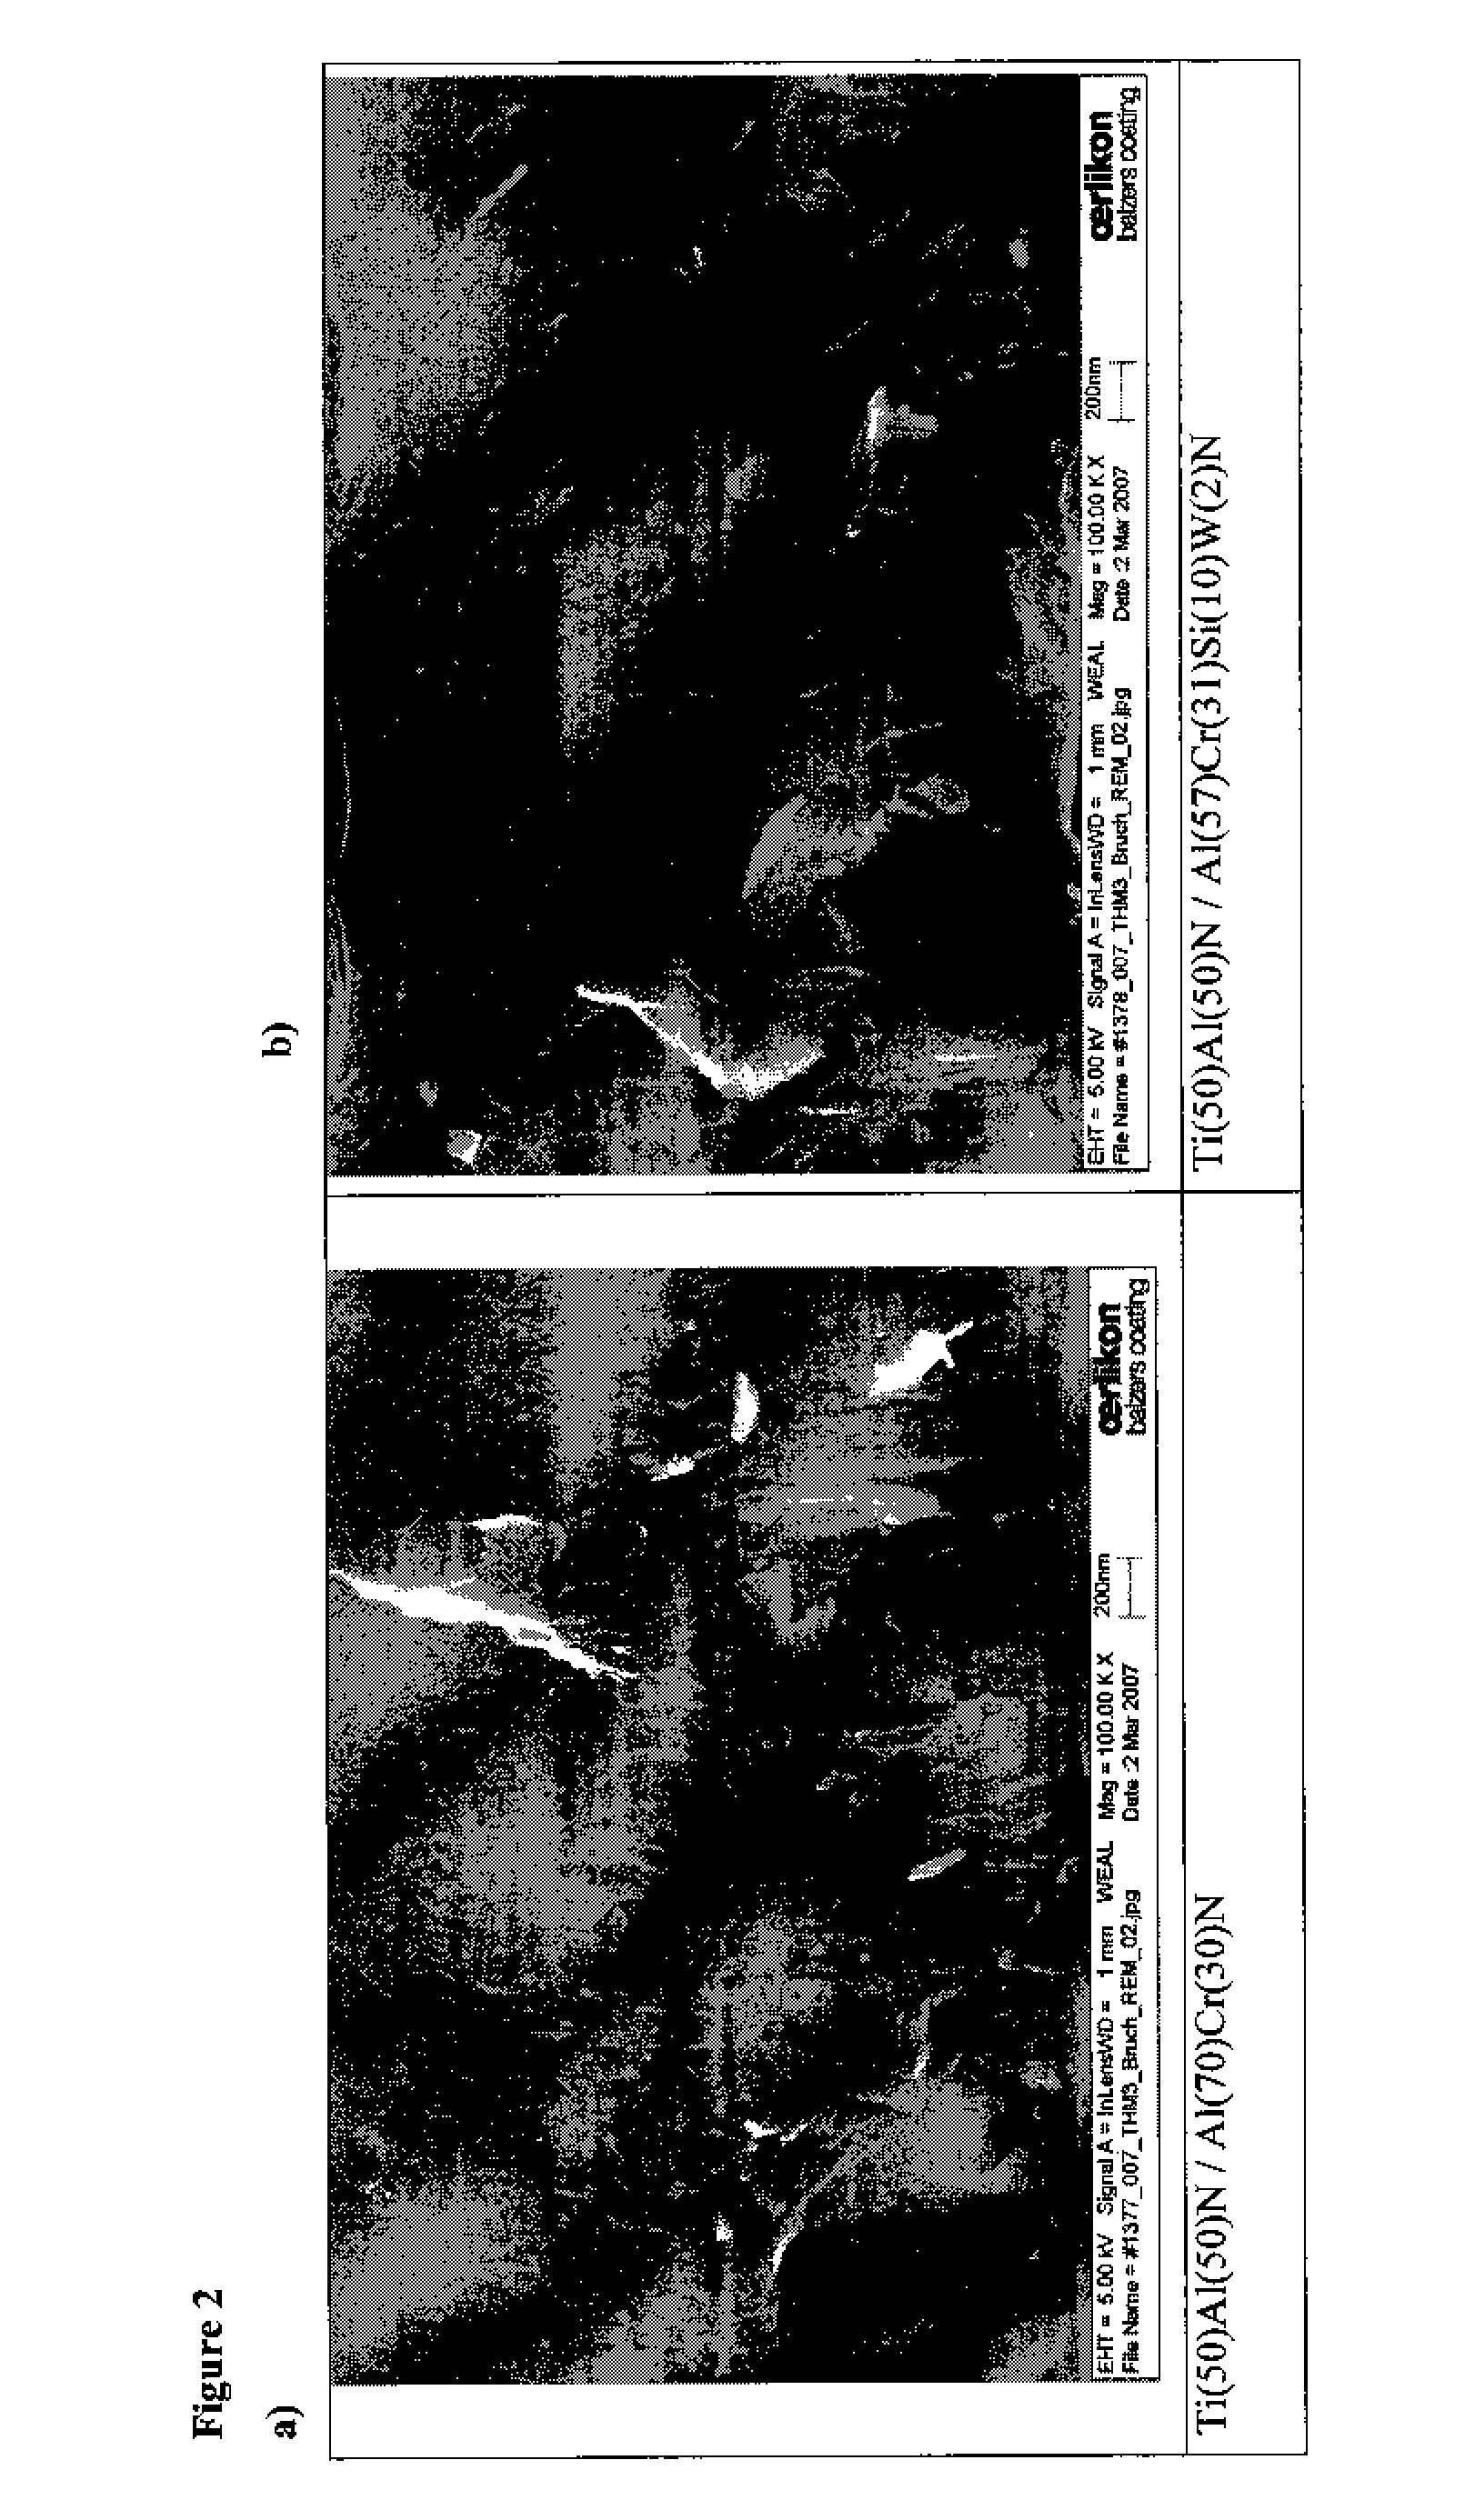 Wear resistant hard coating for a workpiece and method for producing the same